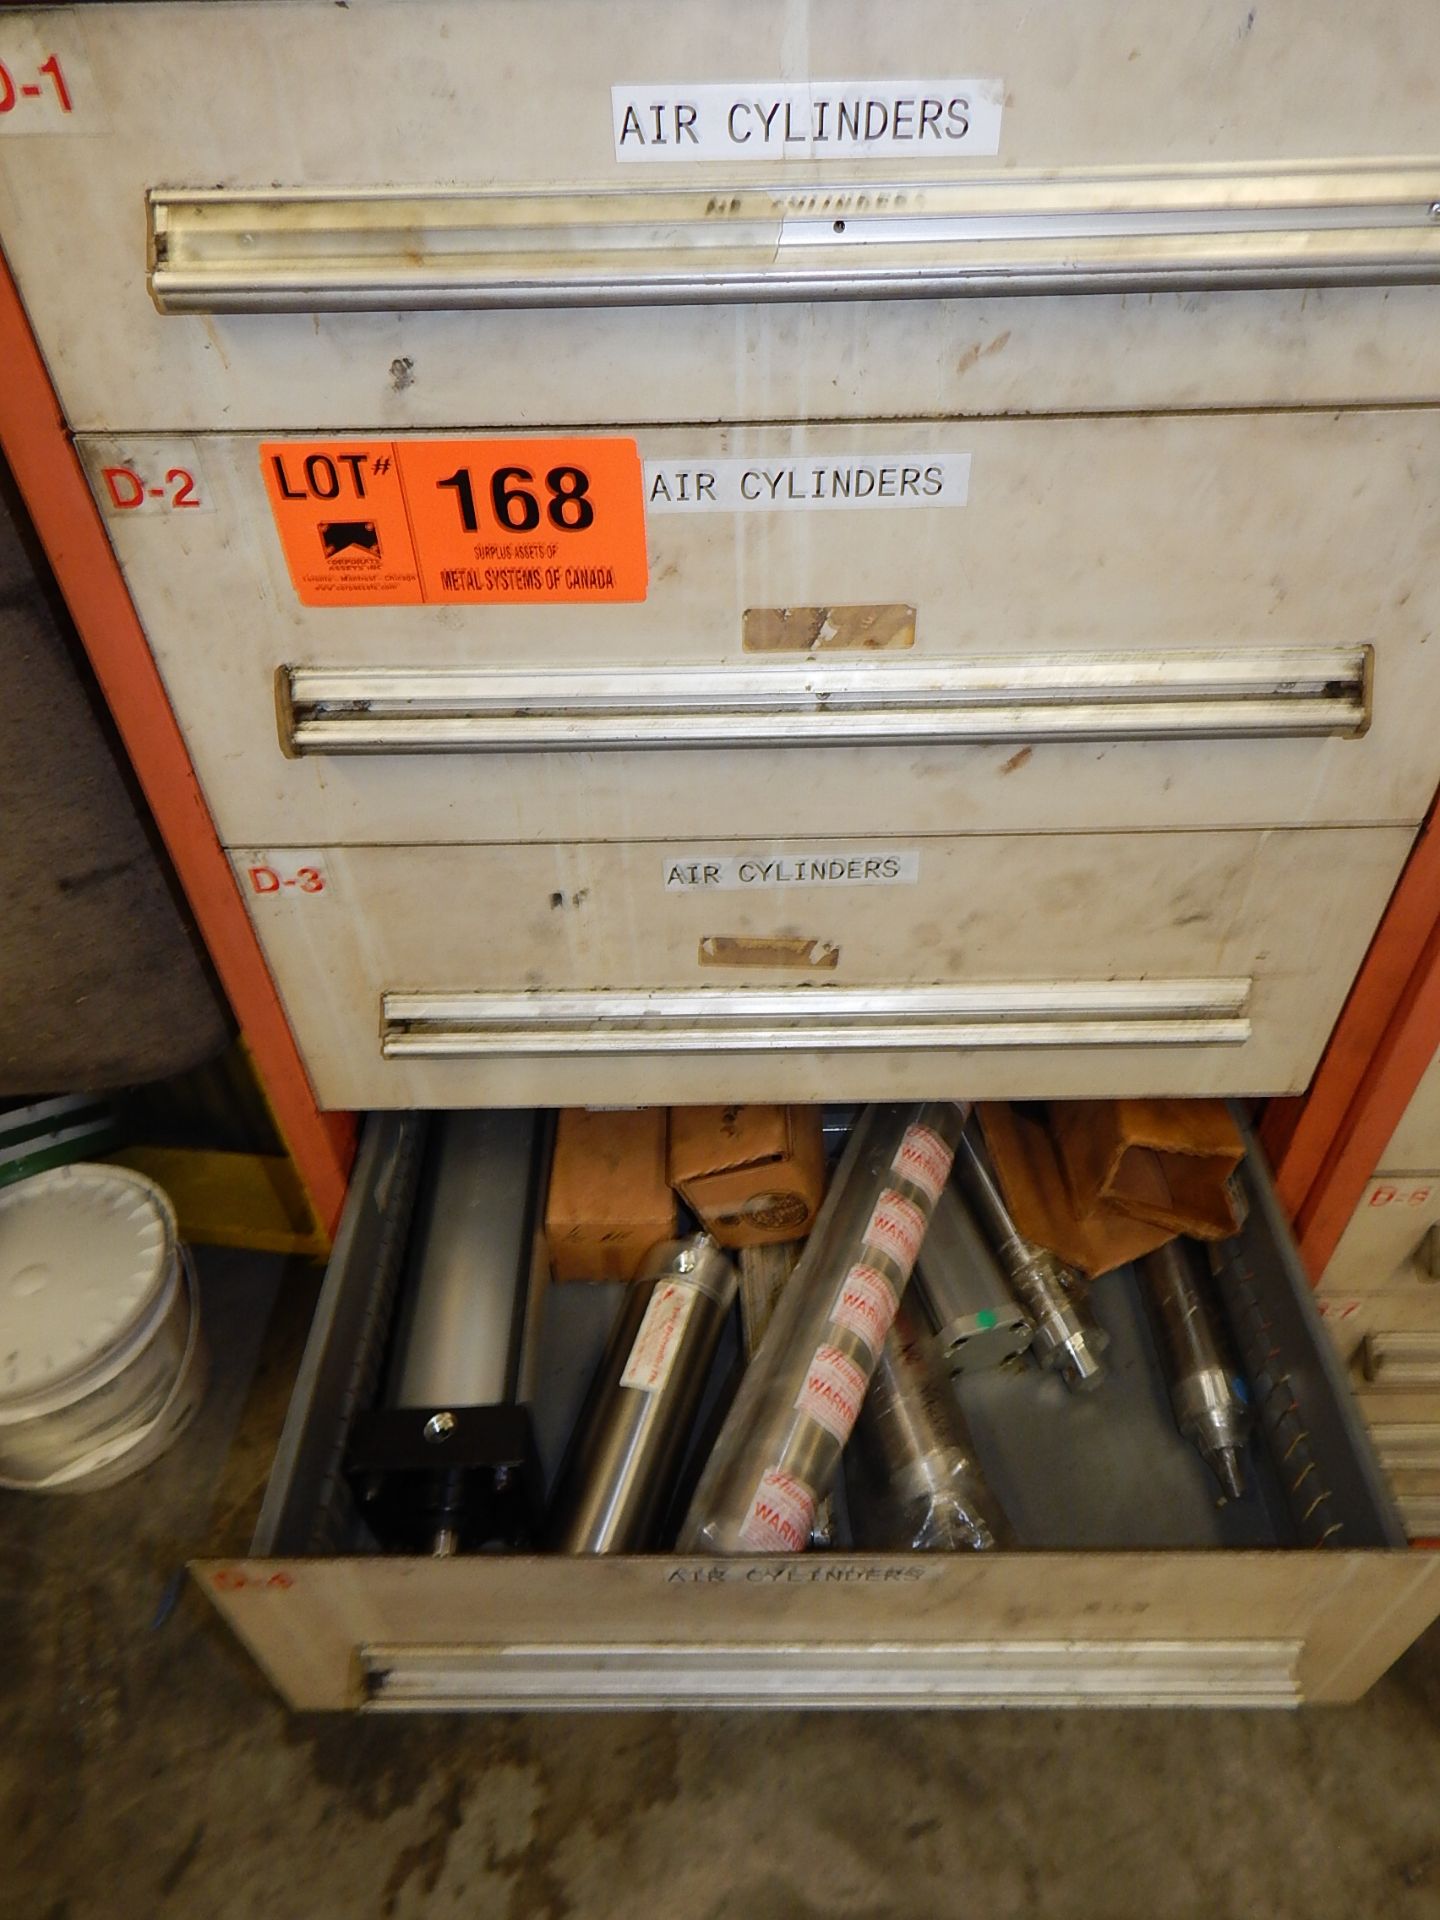 LOT/ CONTENTS OF CABINET CONSISTING OF AIR CYLINDERS - Image 2 of 2